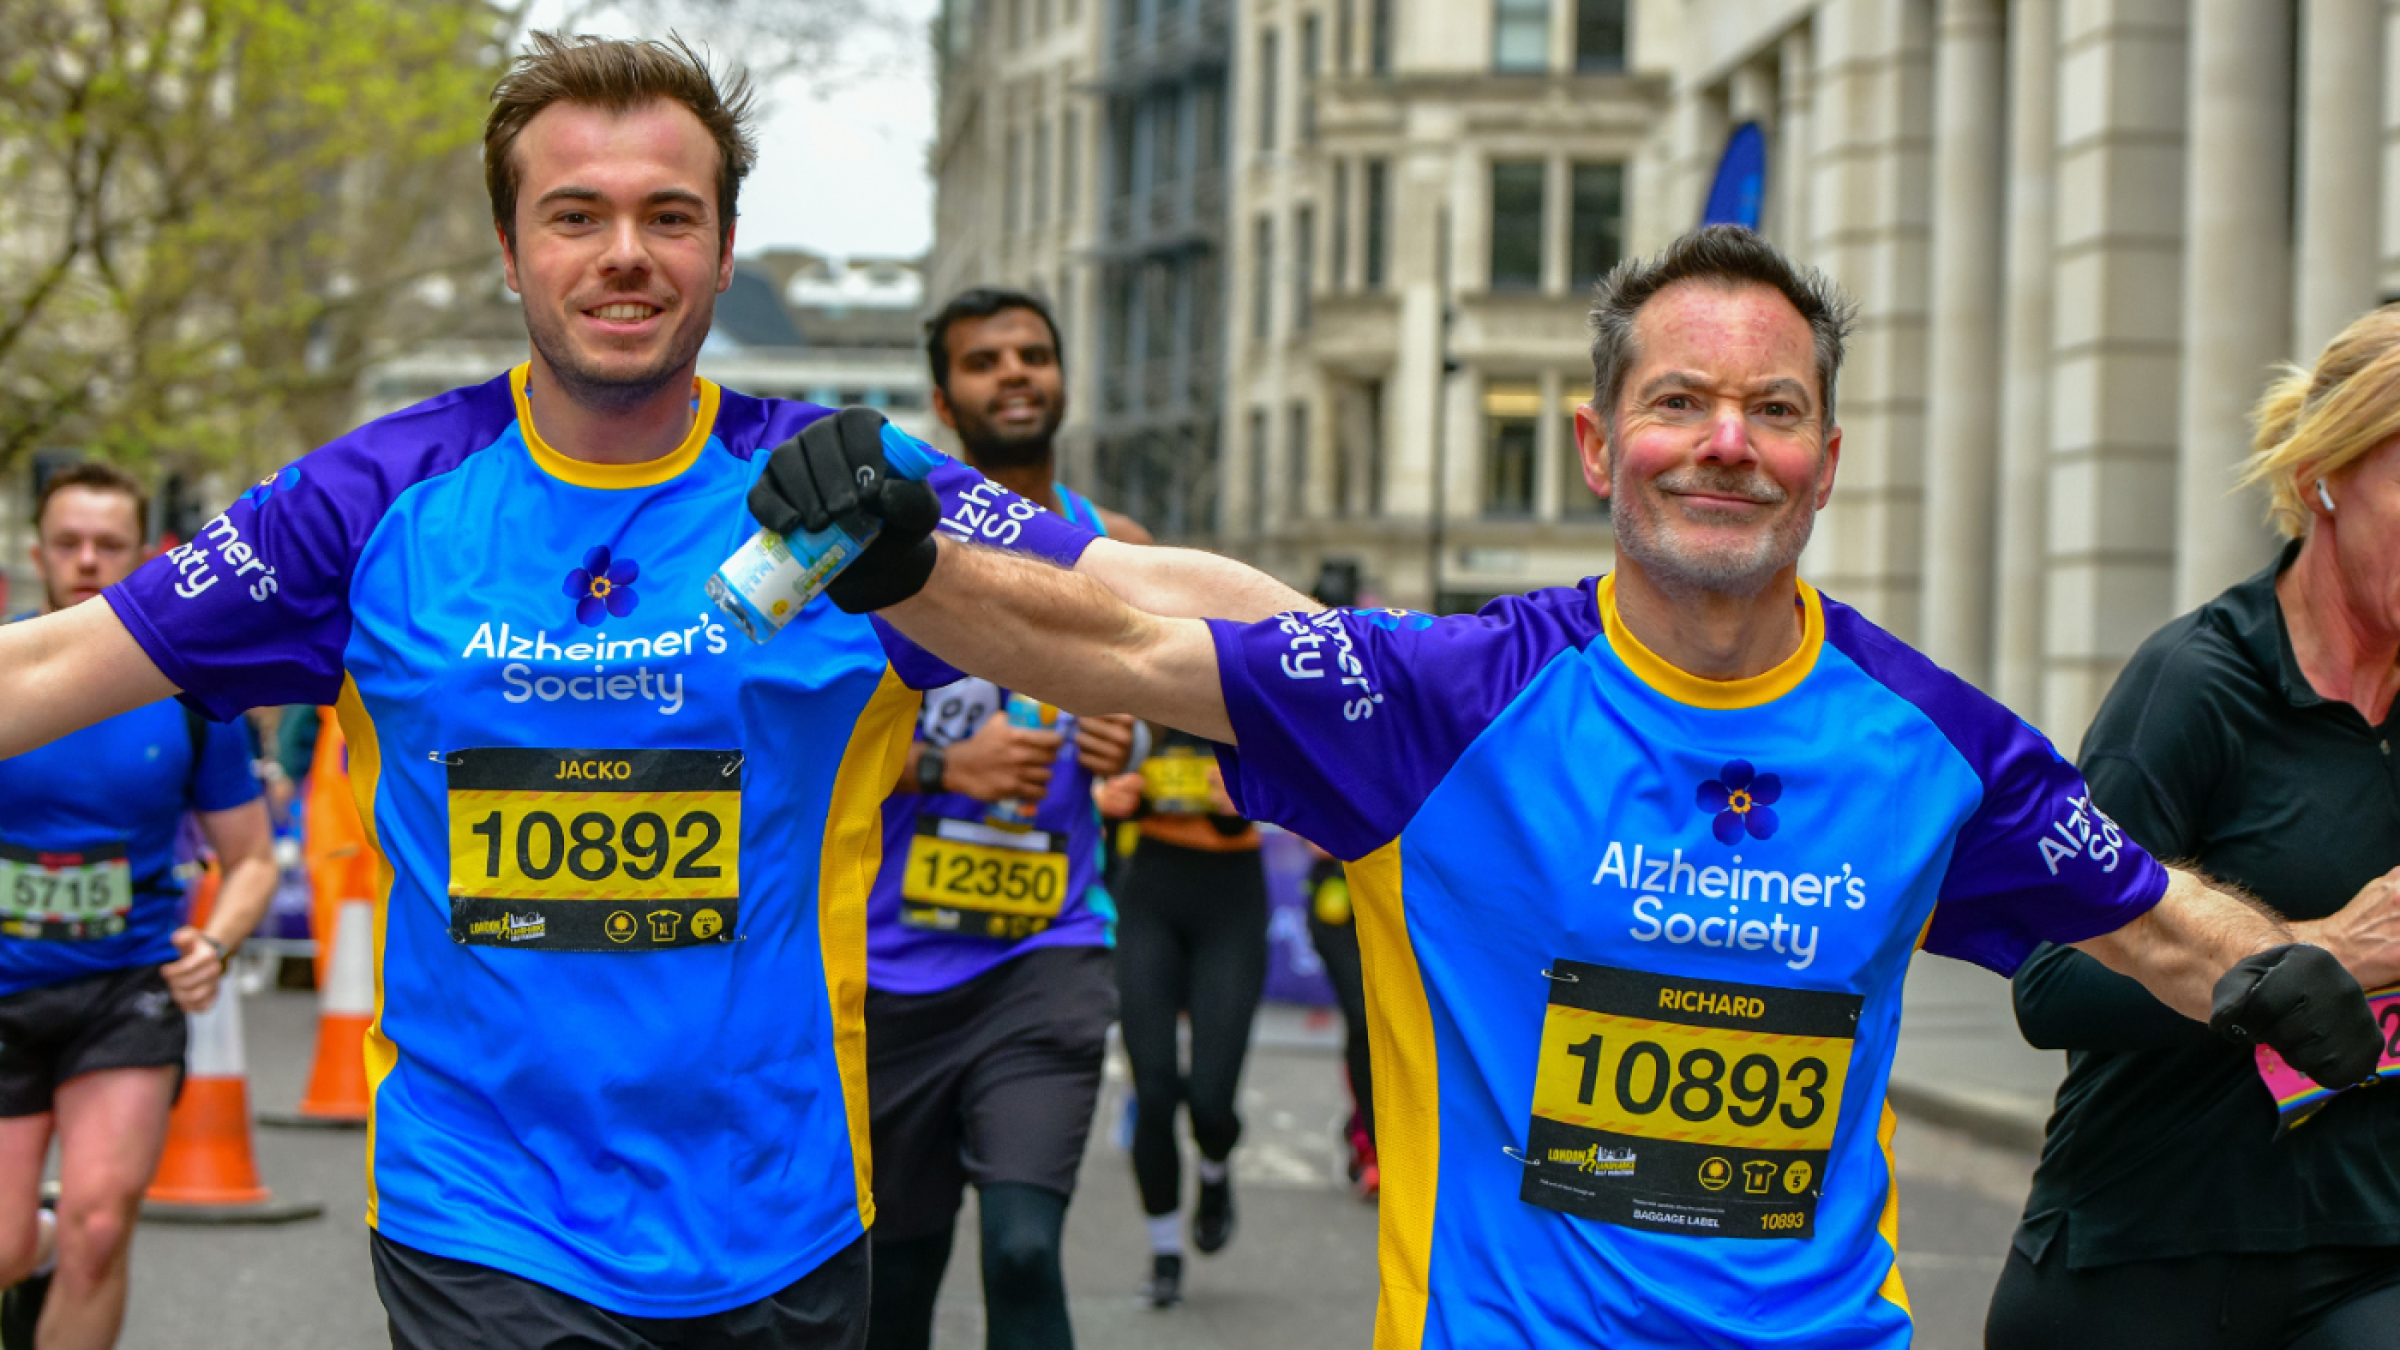 Two Alzheimer's runners with arms outstretched happily take on race